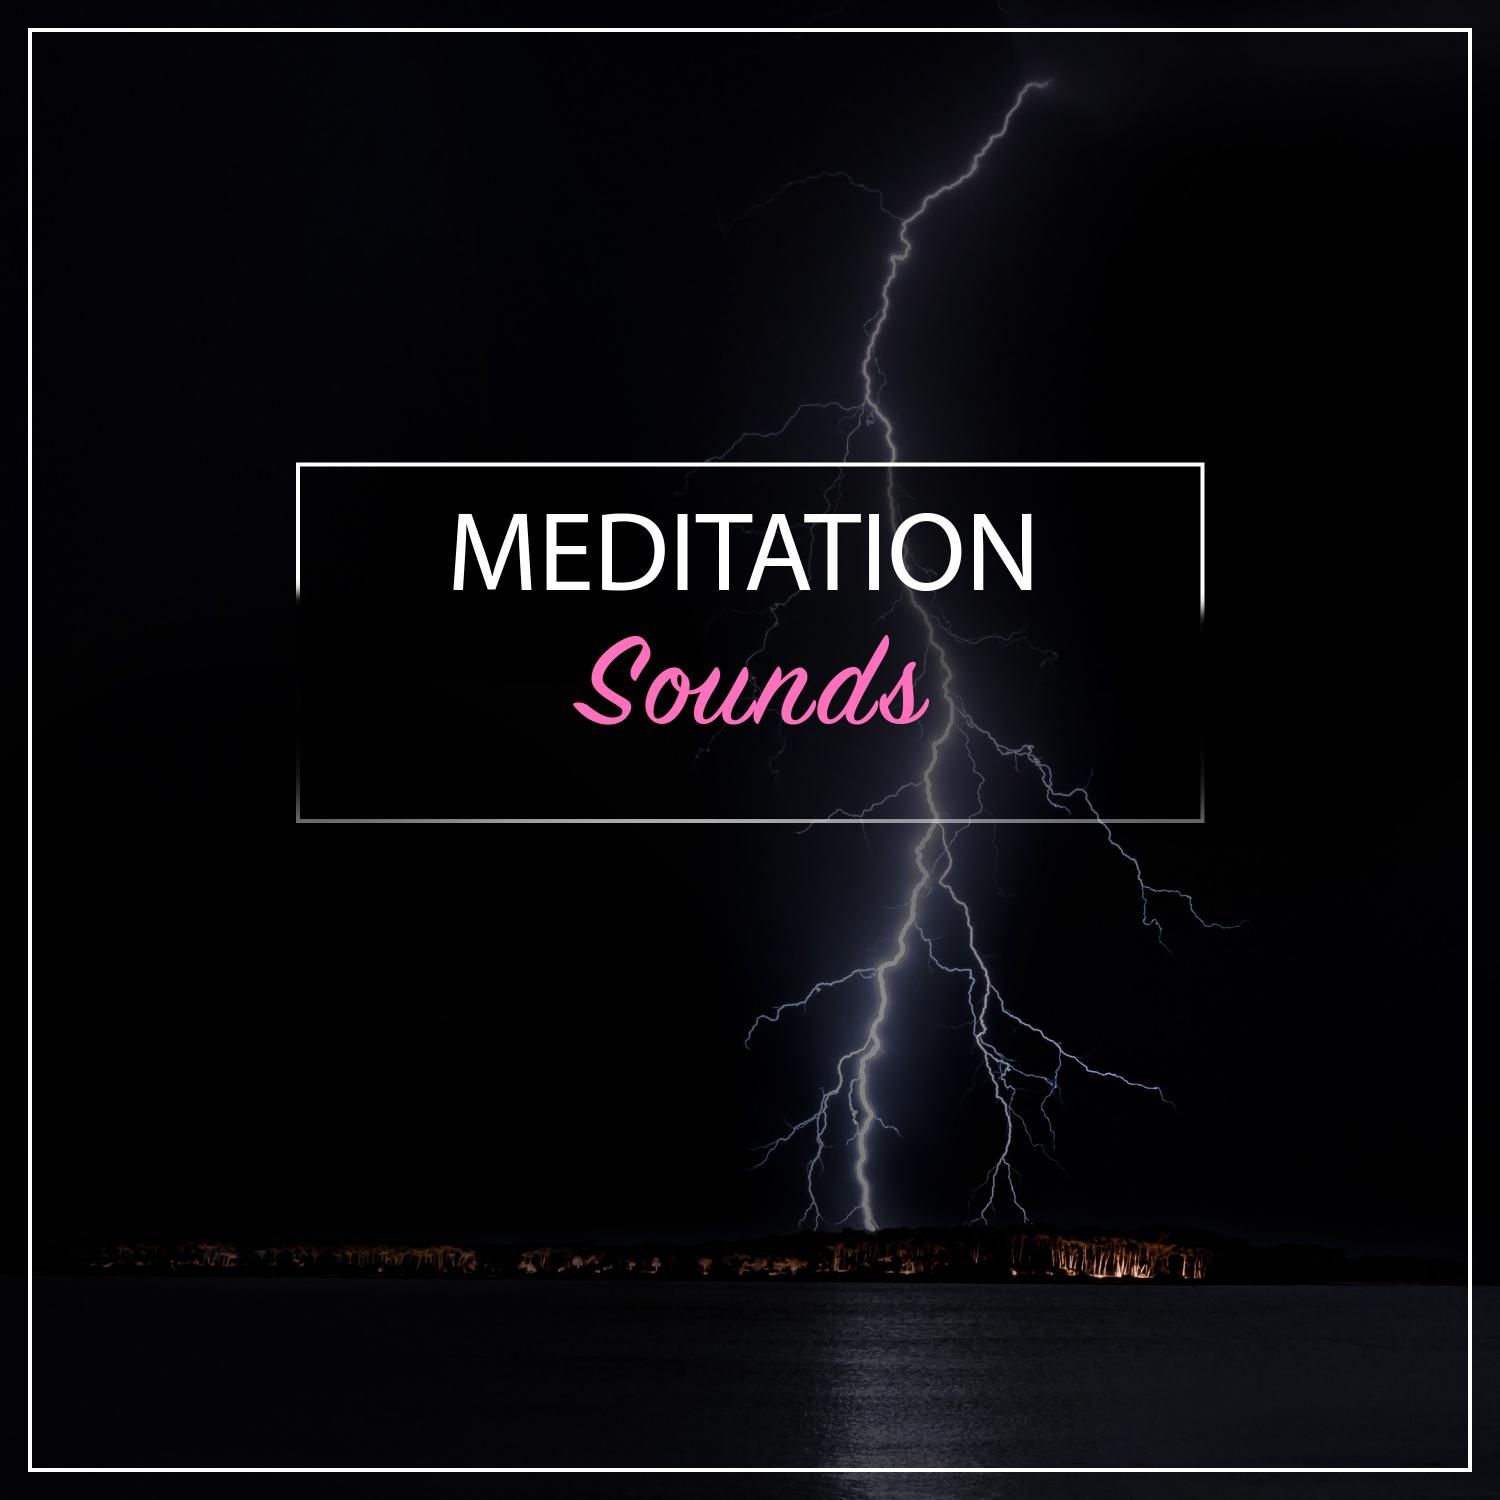 16 Meditation Relaxation Sounds - Ambient Rainfall